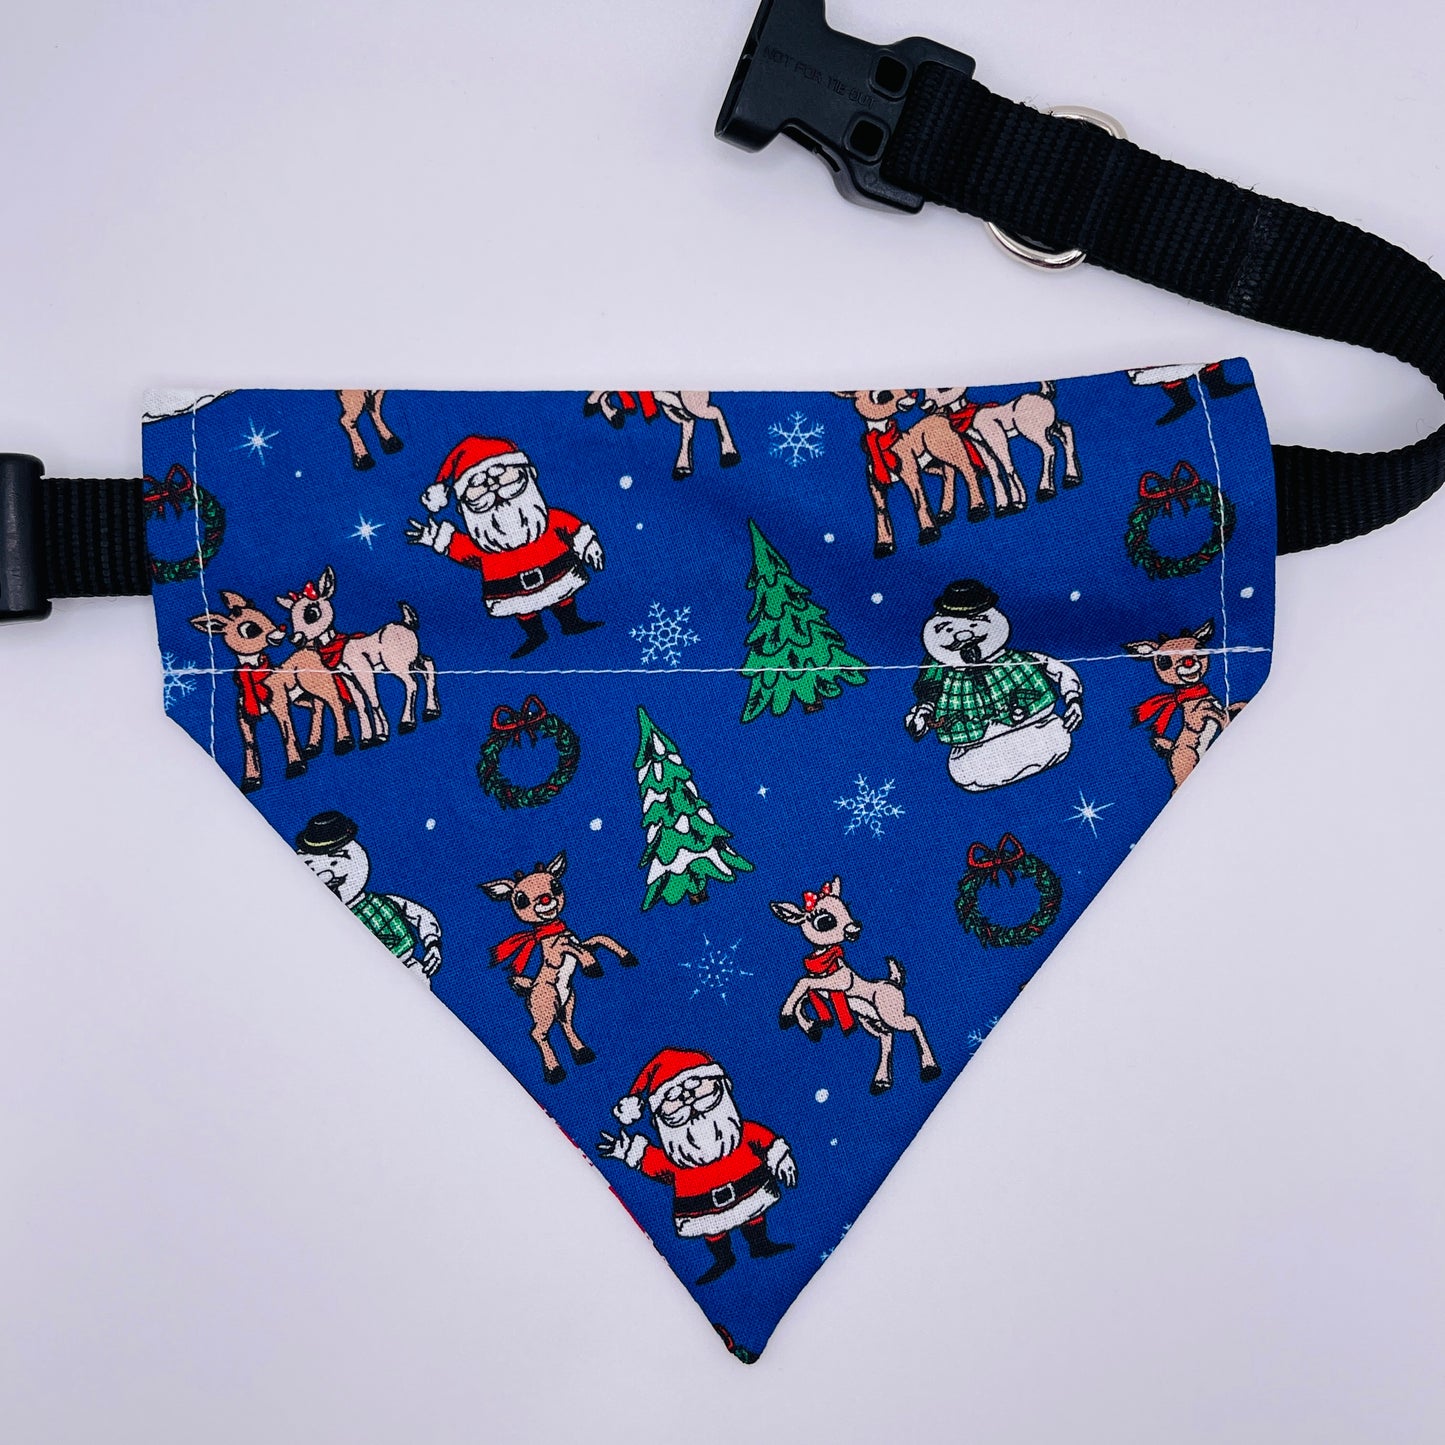 Rudolph The Red Nose Reindeer Bandana